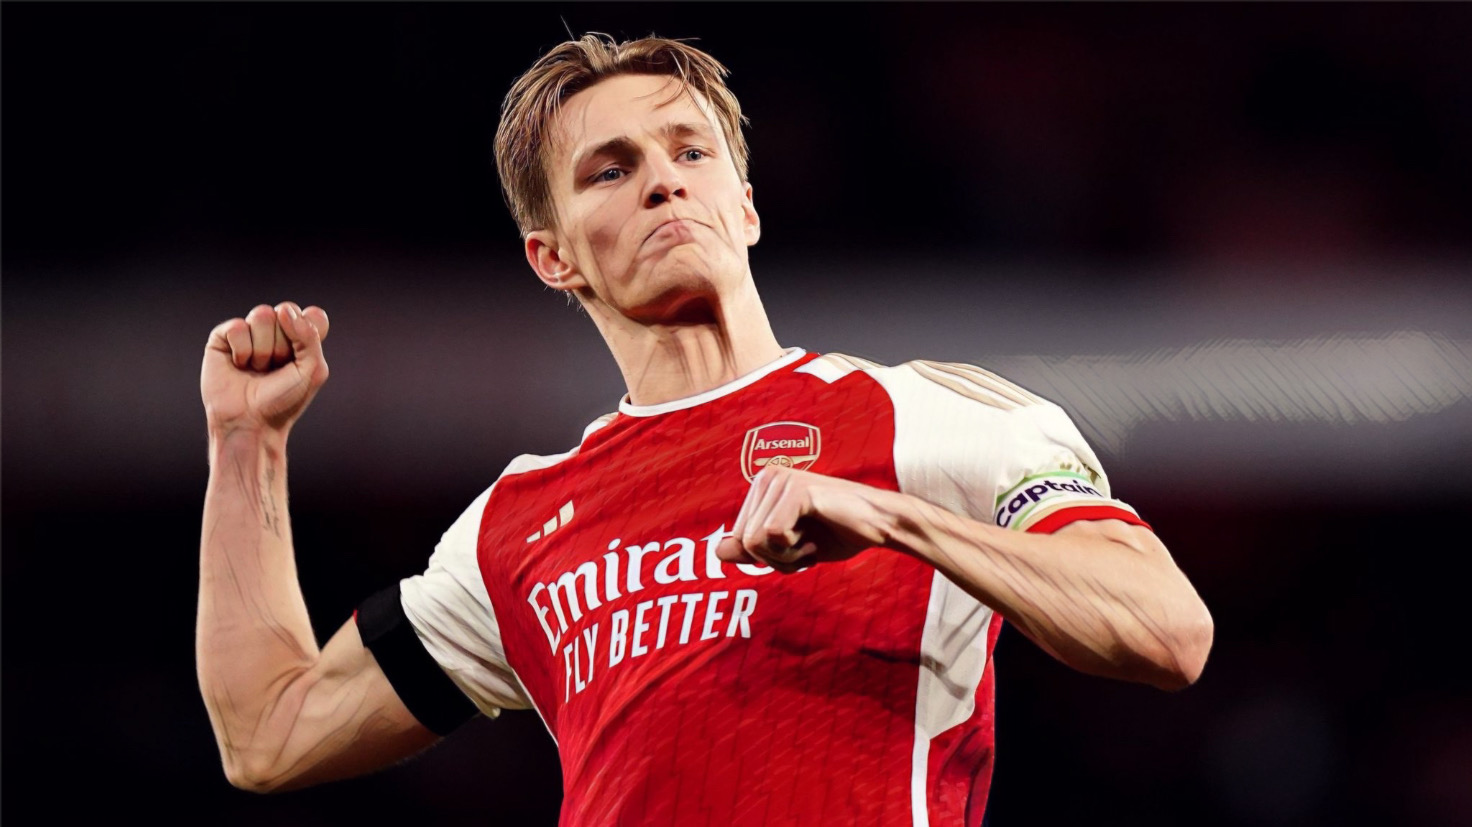 Five Premier League players who impressed in midweek, featuring Arsenal midfielder Martin Odegaard